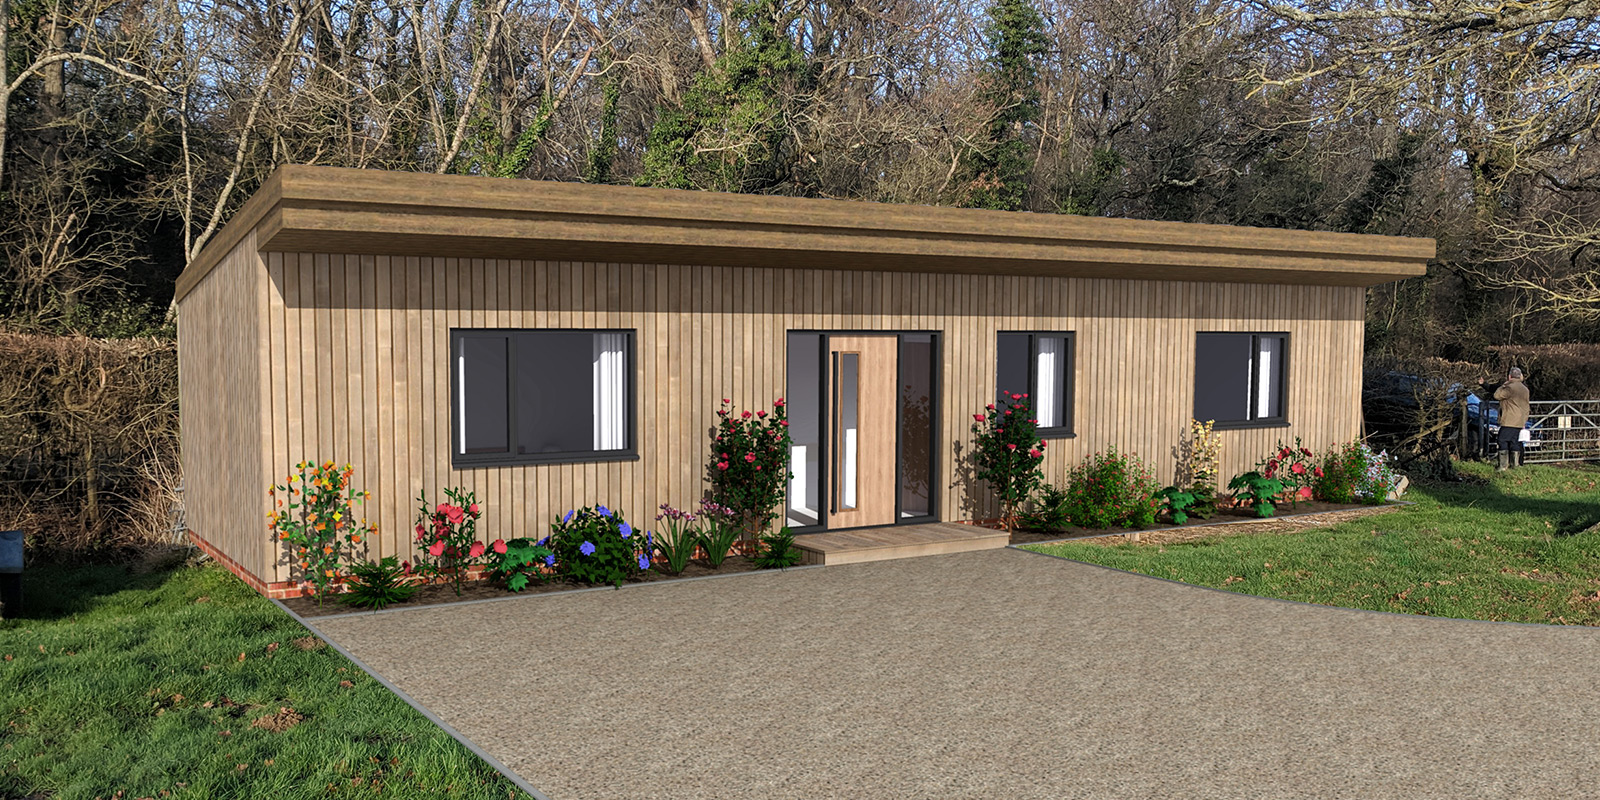 Residential Dwelling from Sheep Barn - Isfield - 01